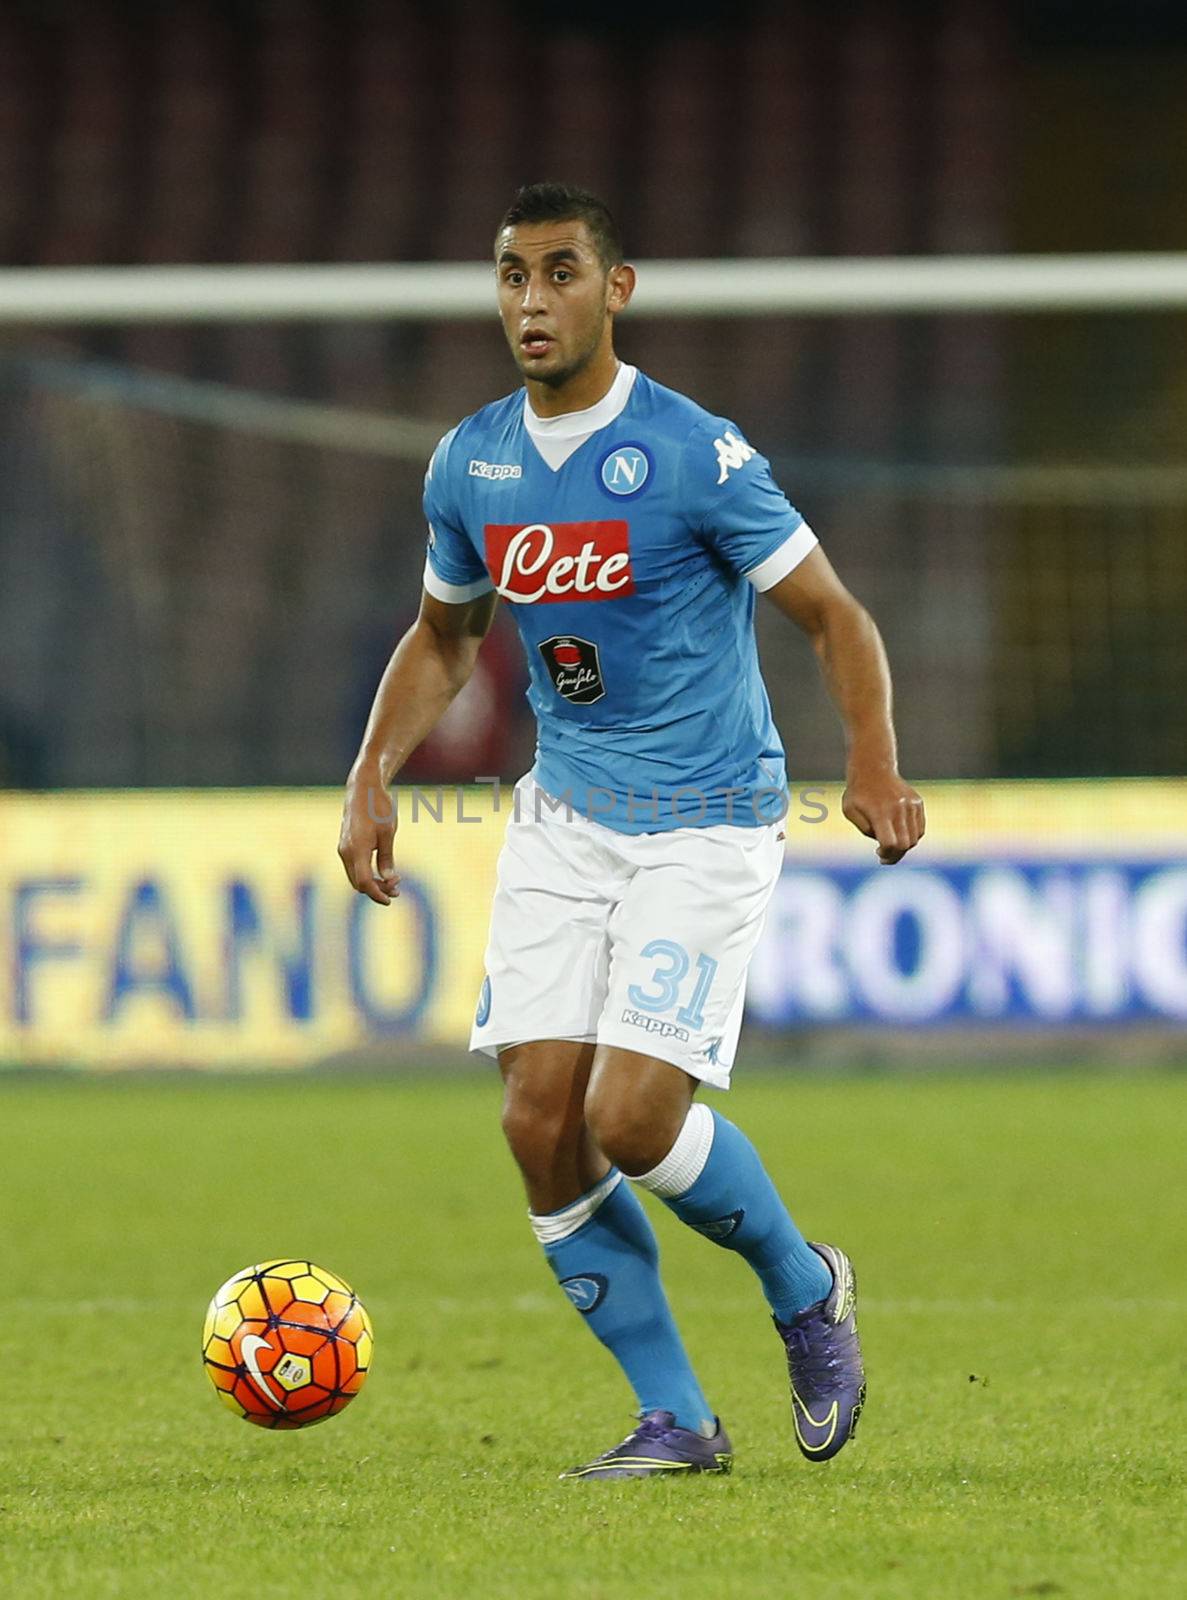 ITALY, Naples: Napoli beat Udinese 1-0 in their Serie A match at San Paolo stadium in Naples on November 8, 2015. Faouzi Ghoulam.